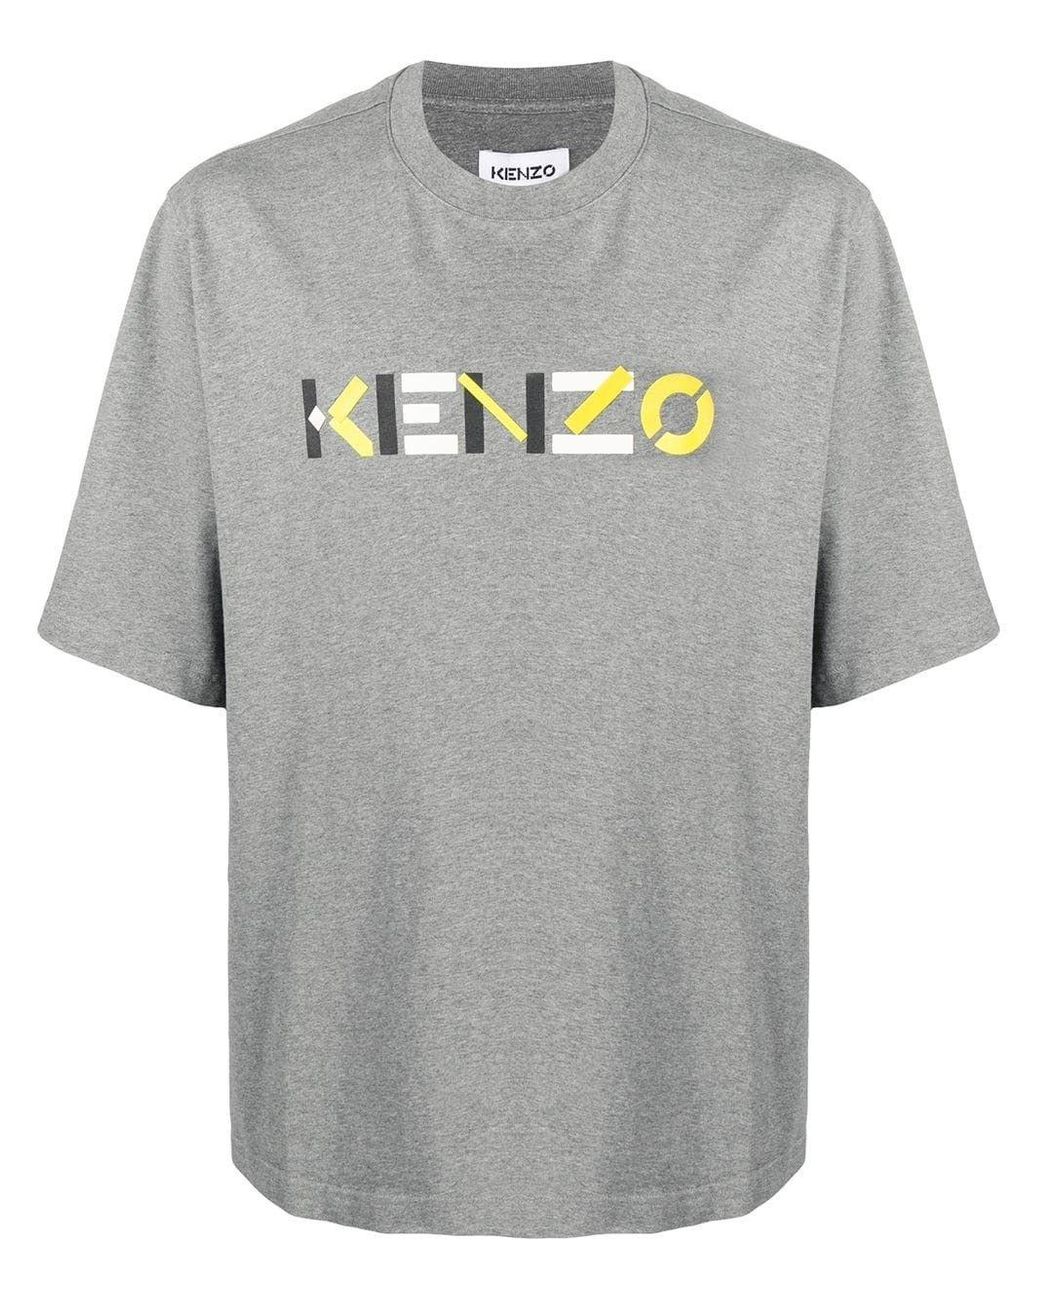 KENZO Cotton T-shirt in Grey (Gray) for Men - Lyst